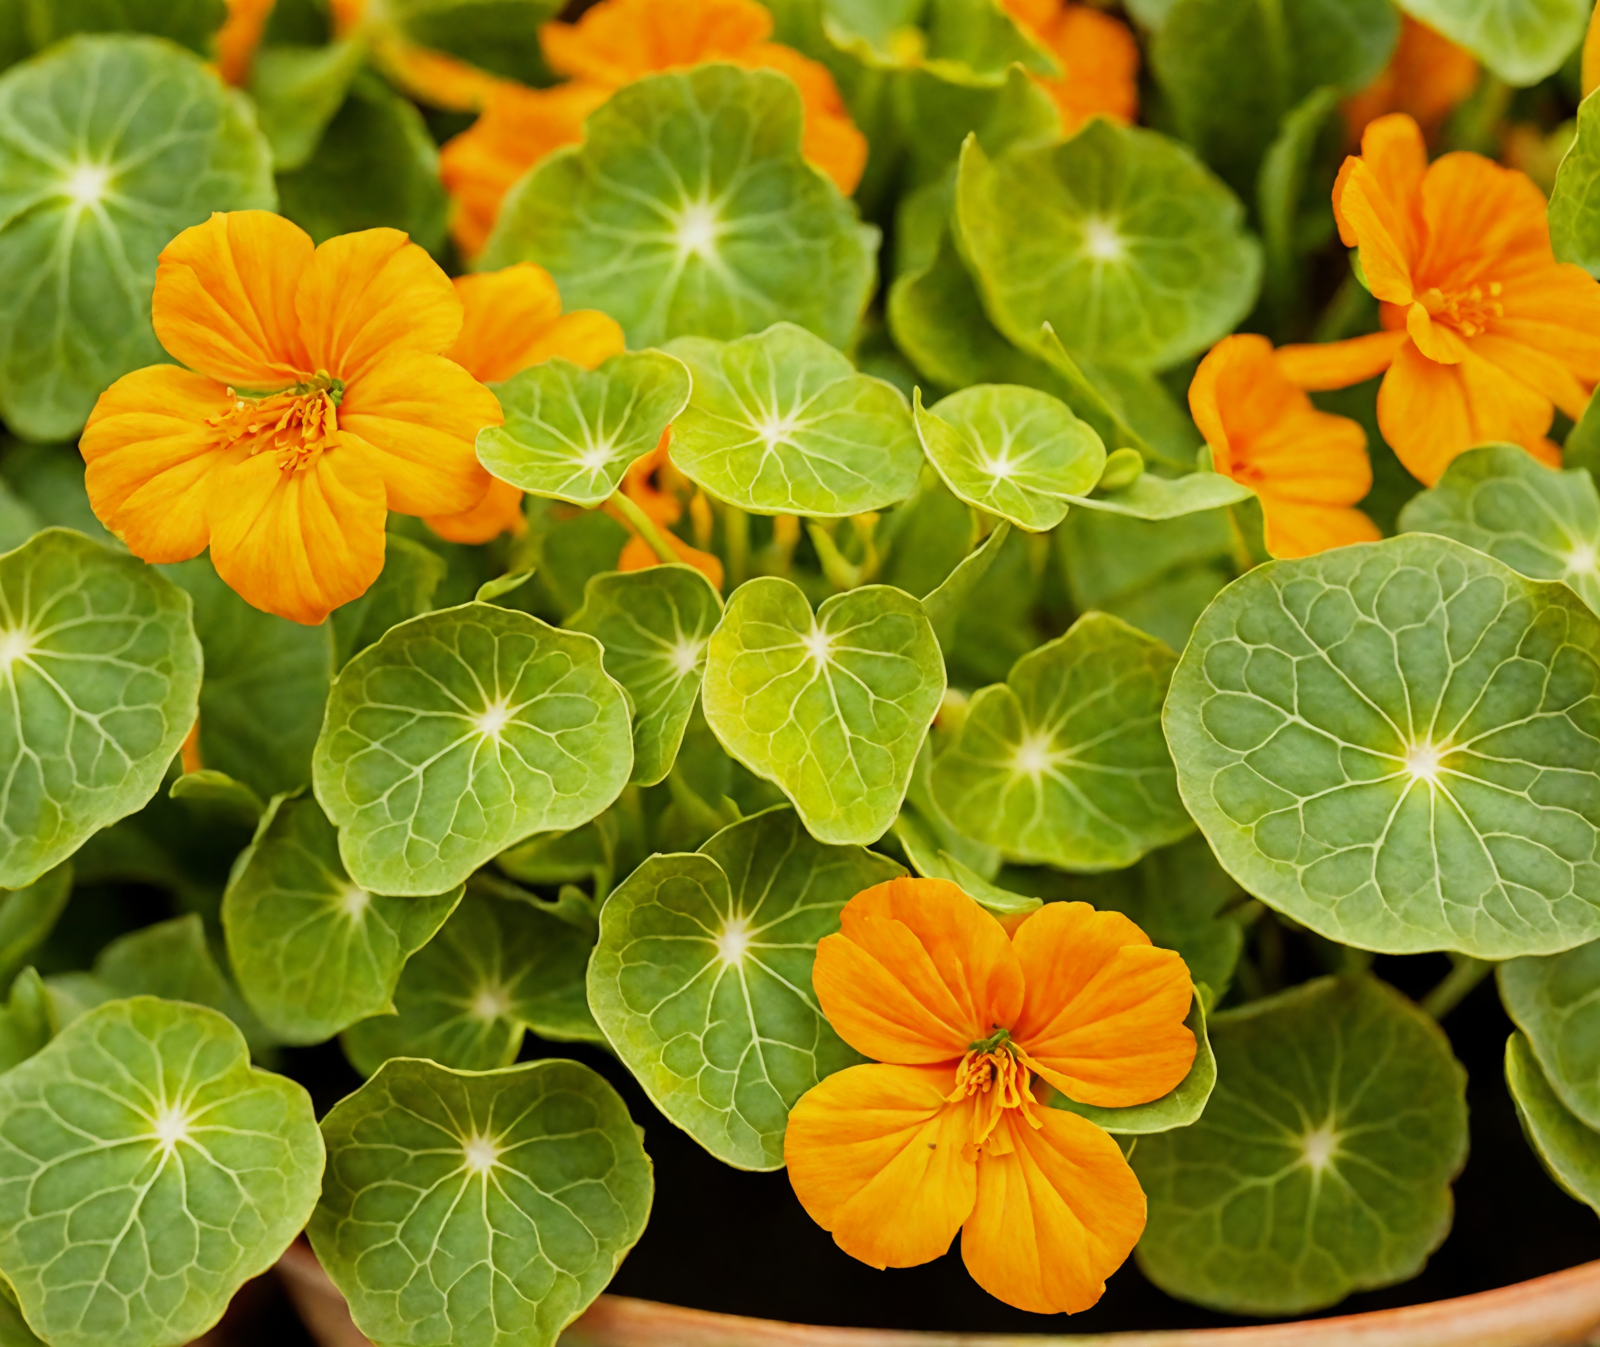 Tropaeolum majus, vibrant yellow flowers in a bowl, with dark foliage in the background, clear indoor lighting.